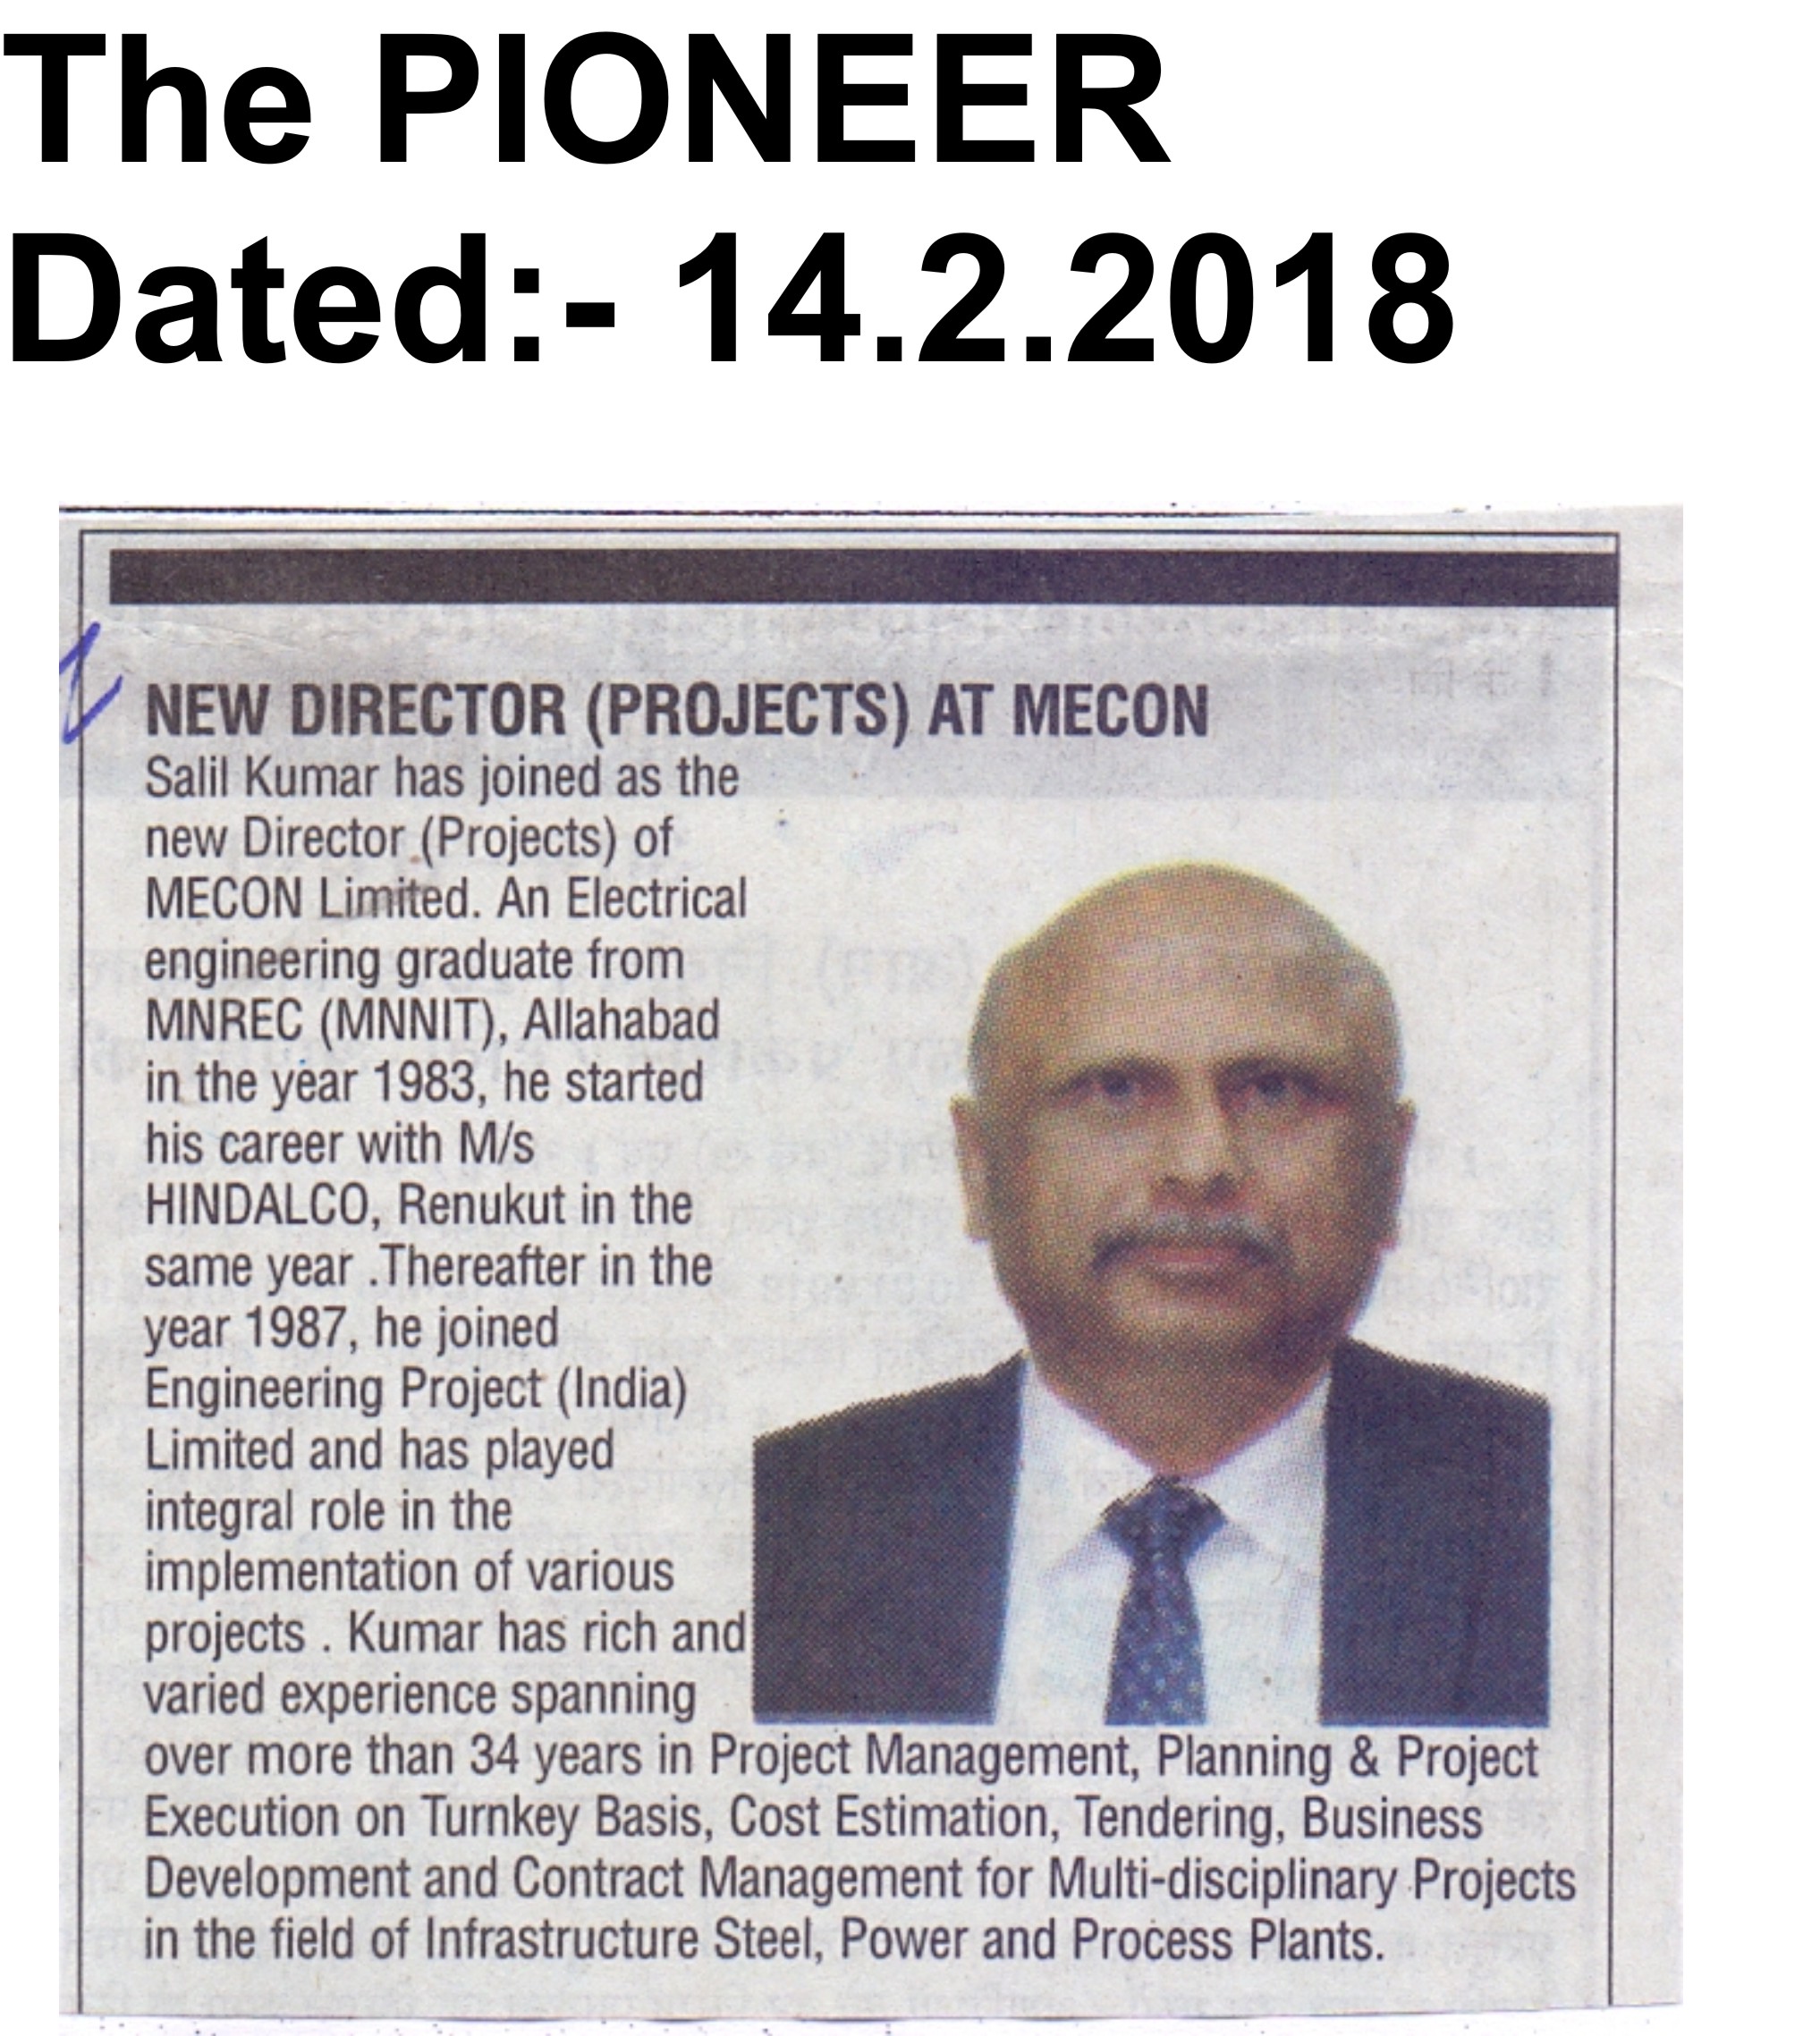 THE PIONEER
Dated: 14.02.2018